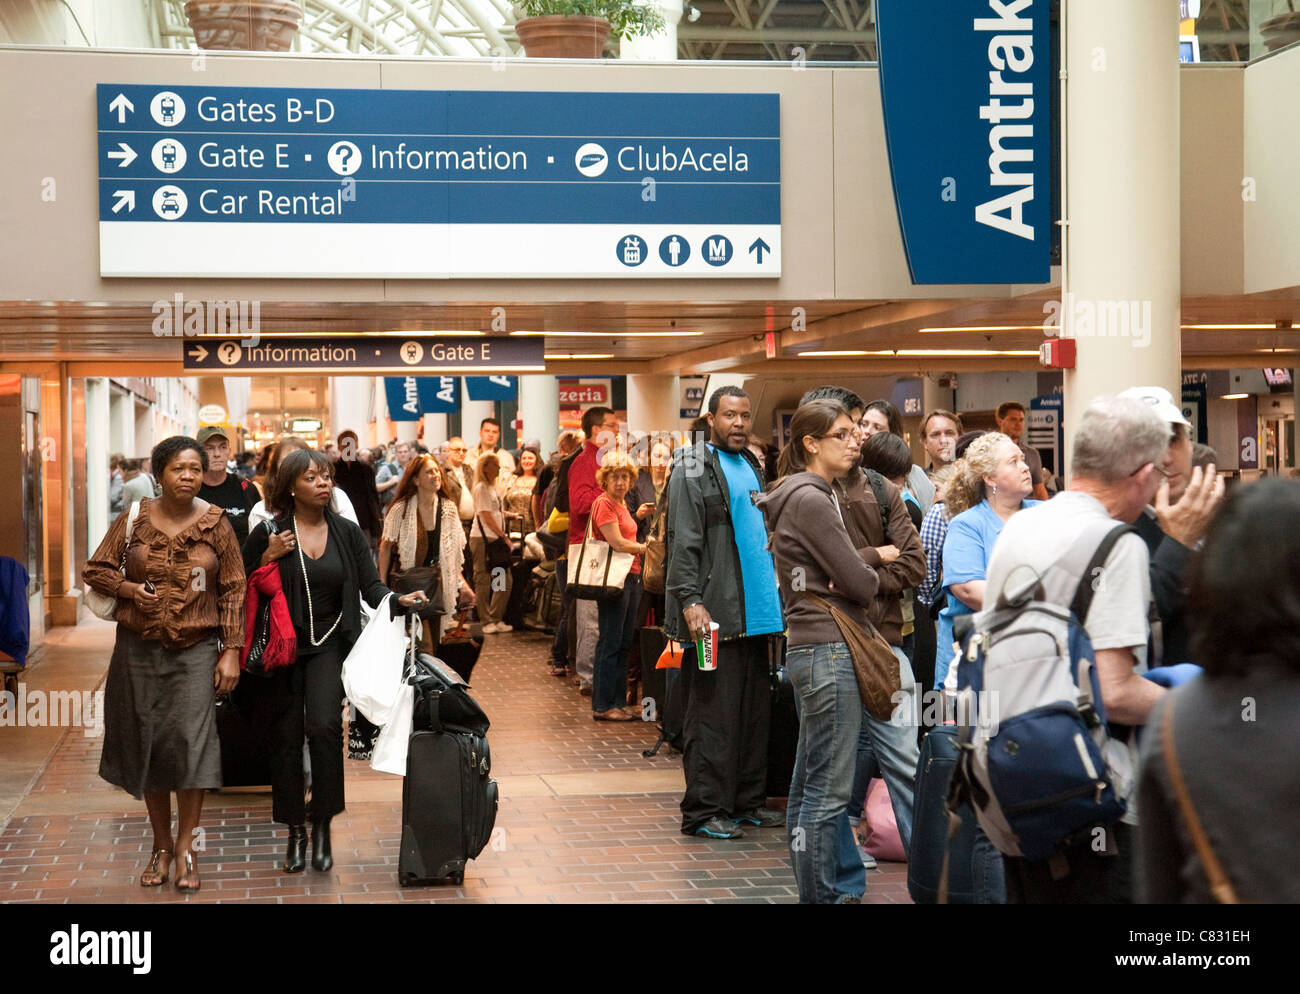 People queuing for the an Amtrak train, Union Station, Washington DC USA Stock Photo